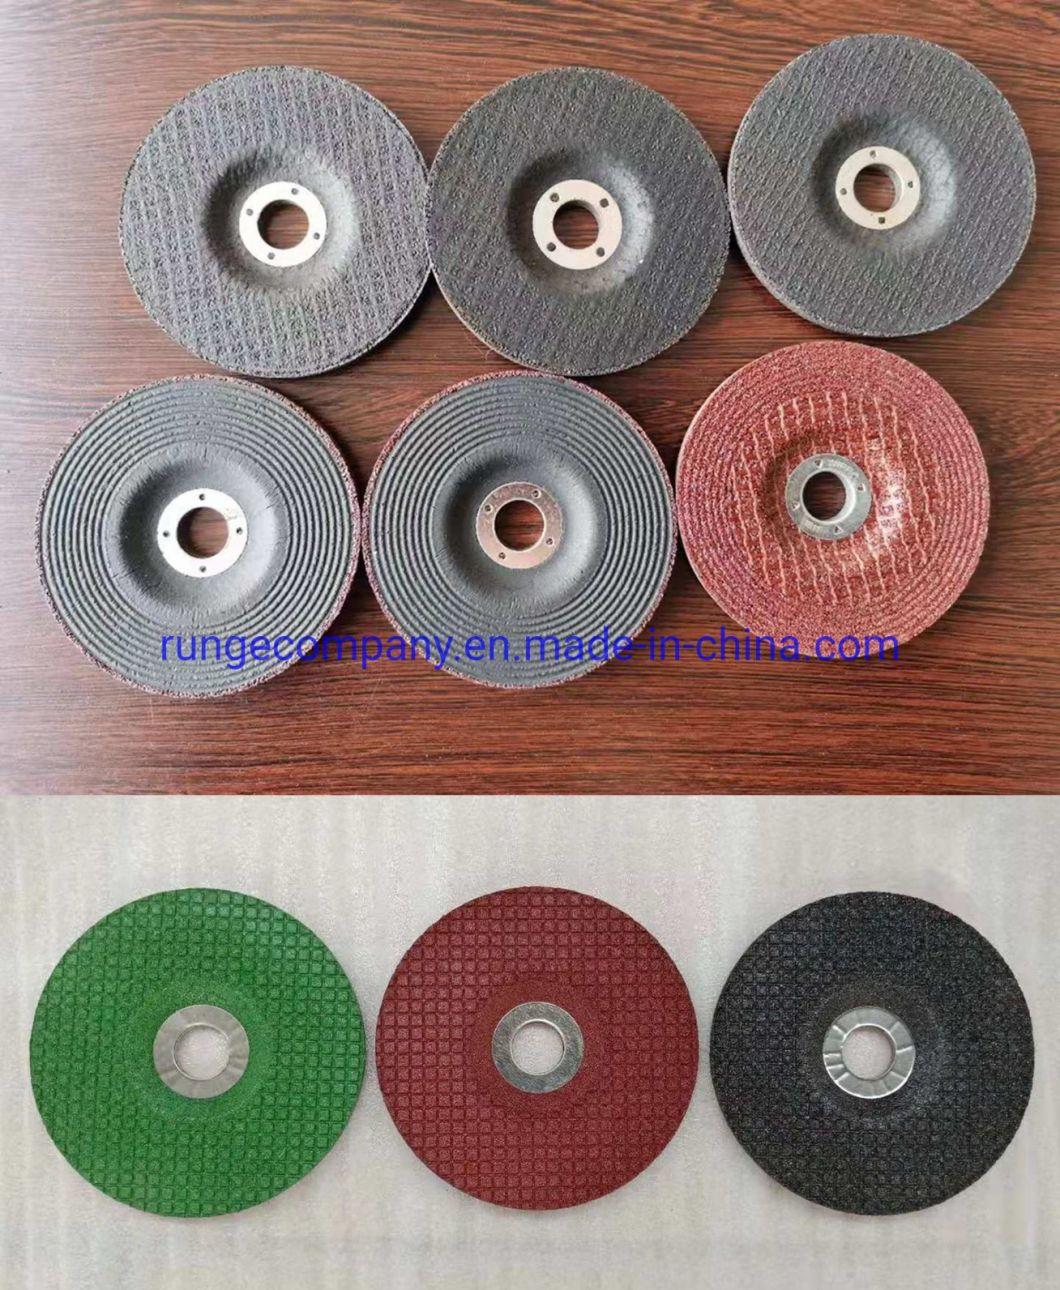 Electric Power Tools Accessories Abrasive Metal Grinding Disc Wheel for Stainless Steel 7" X 1/4" X 7/8" T27